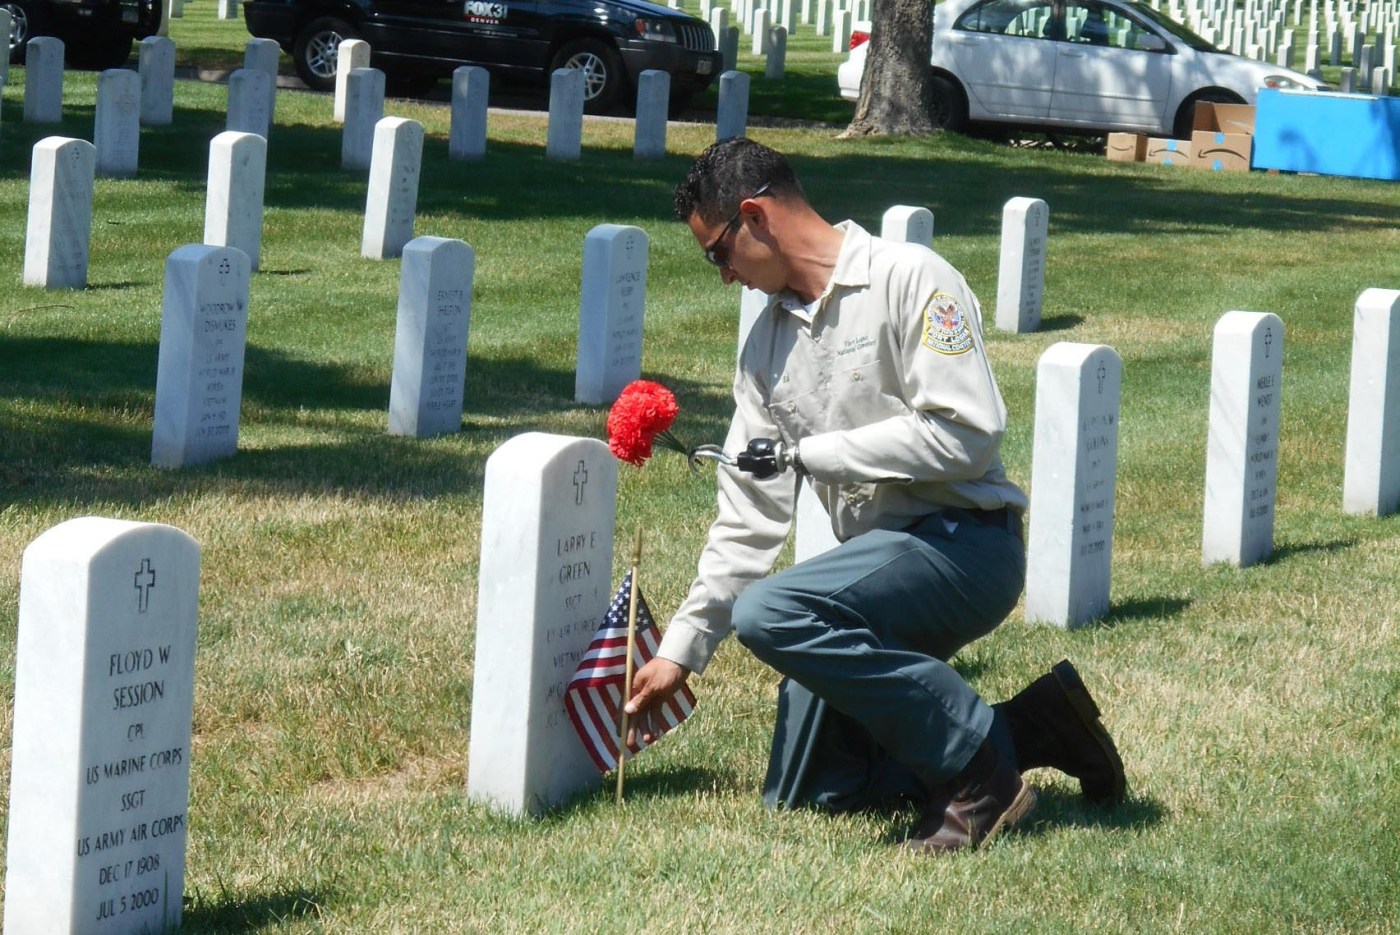 Lyons placing flags, flowers at grave.